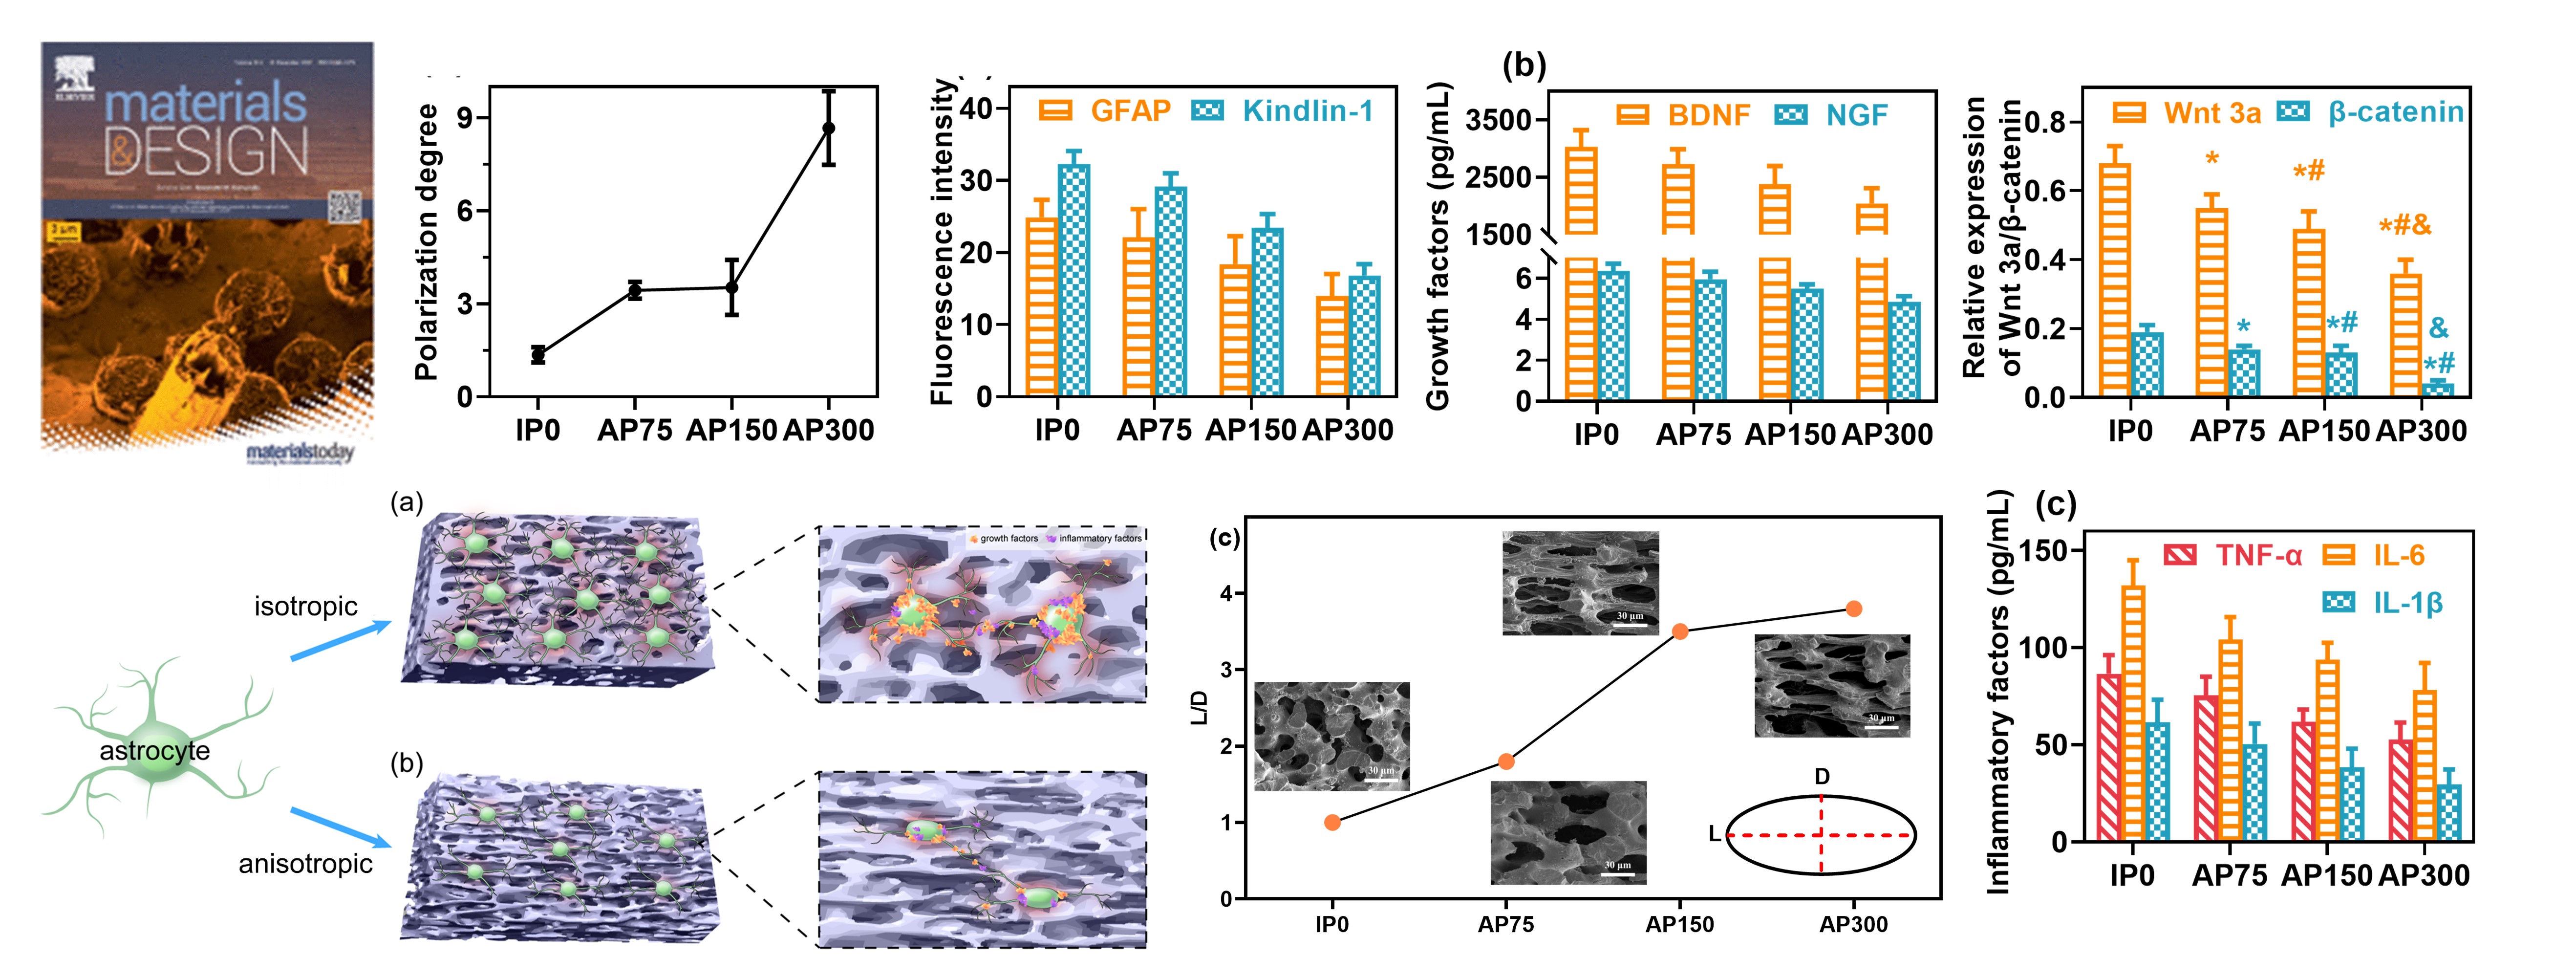 Oriented co-continuous 3D porous scaffolds with inhibited activating functionality: An effective strategy to inhibit the hyperactivation of astrocytes